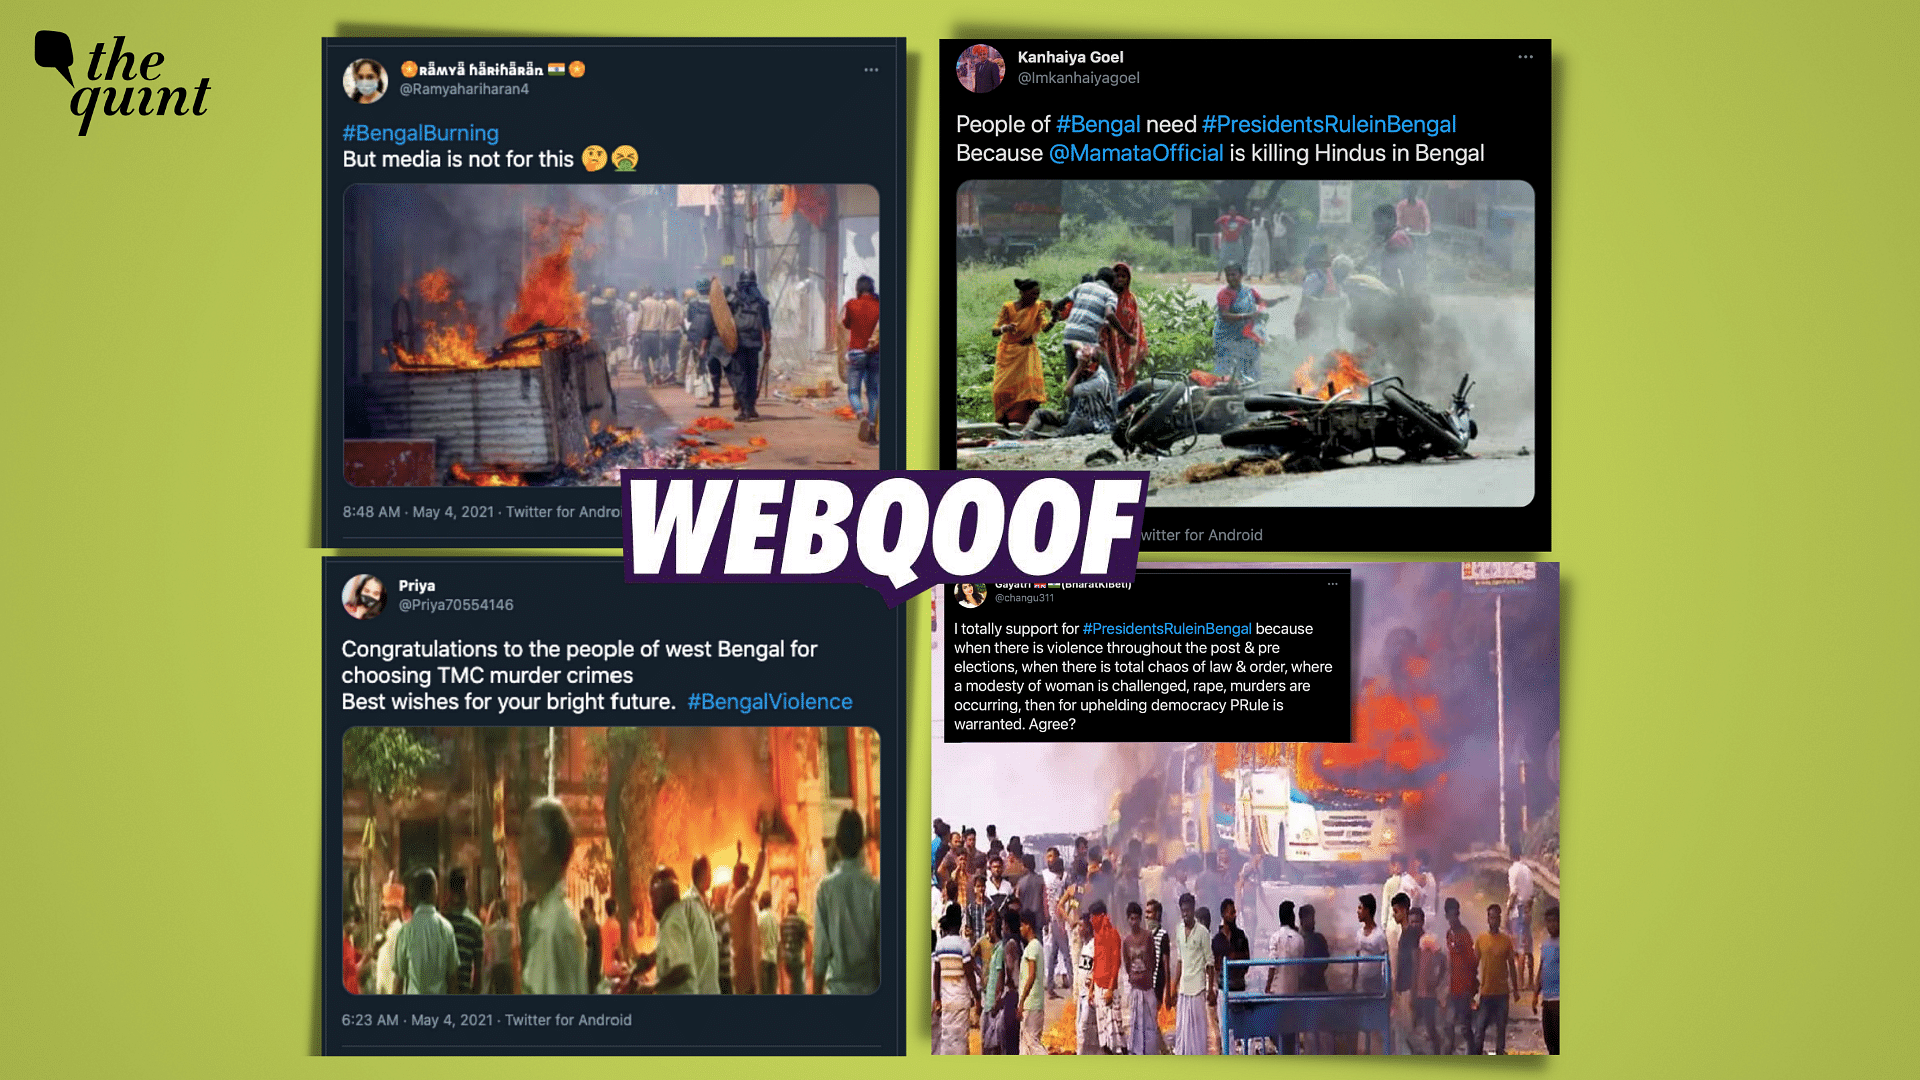 Several incidents of violence have been reported from West Bengal after results were announced on 2 May.